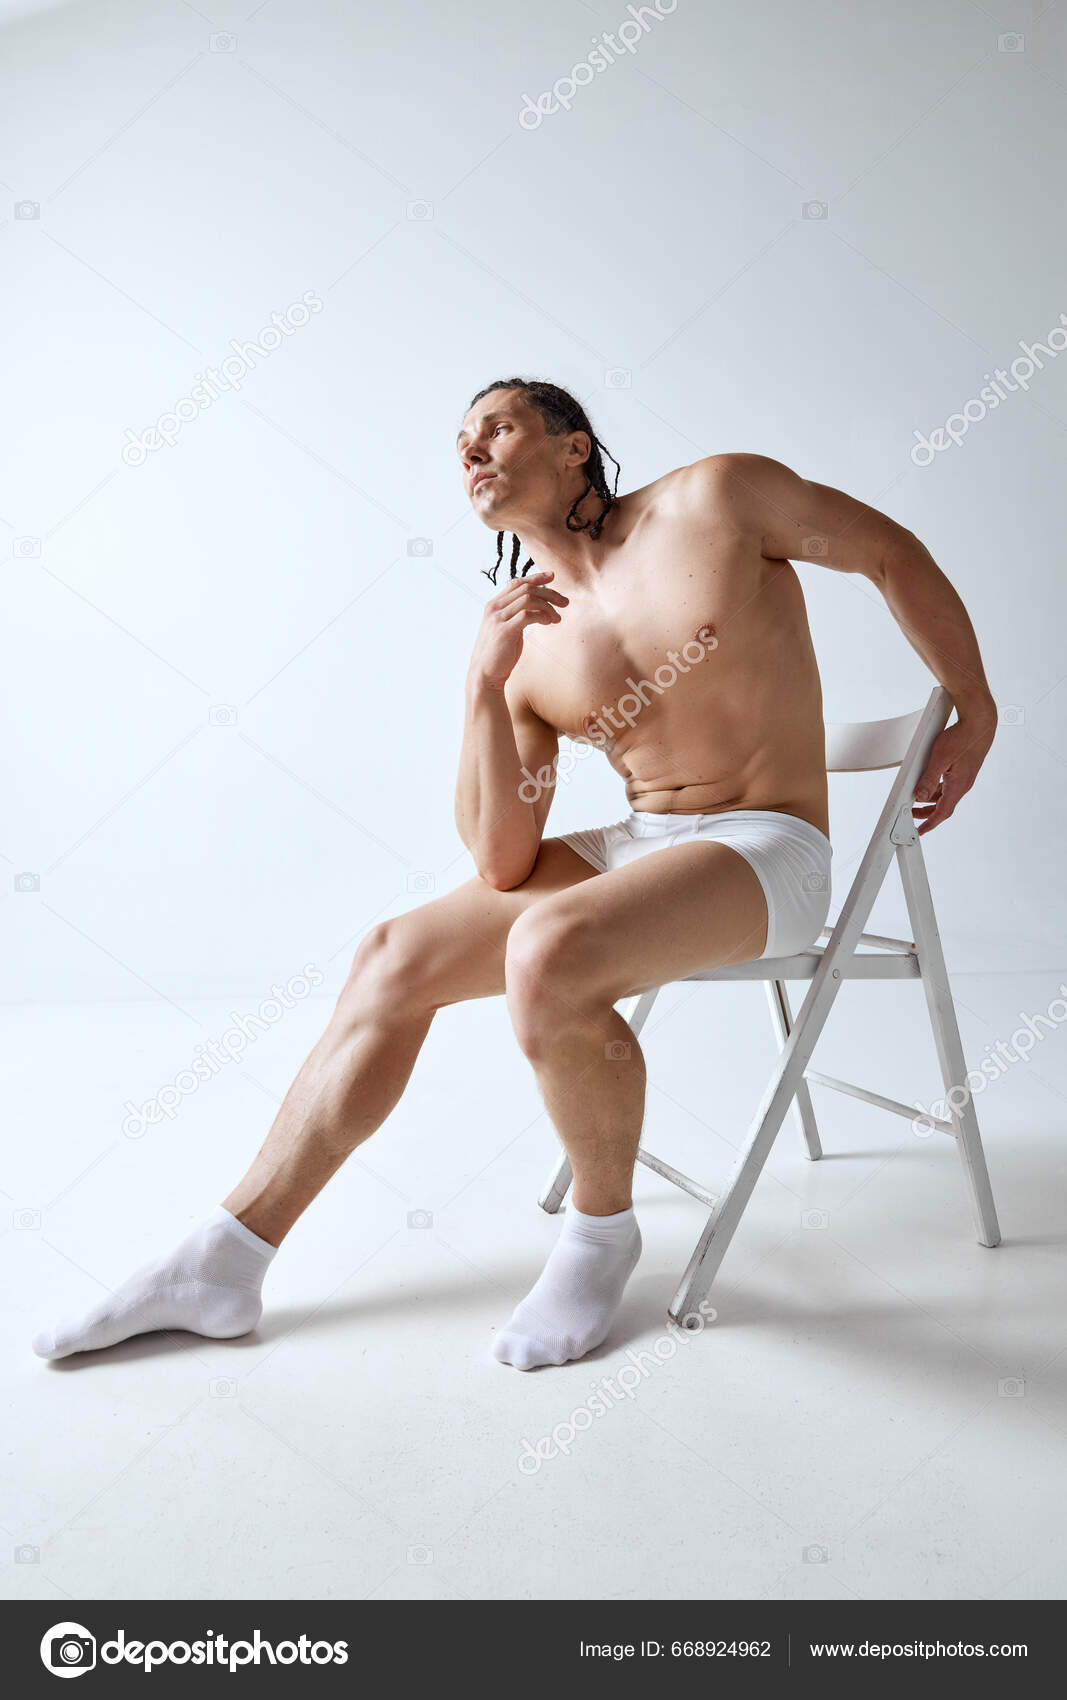 Senior male sitting on a recliner in his undershirt in boxers